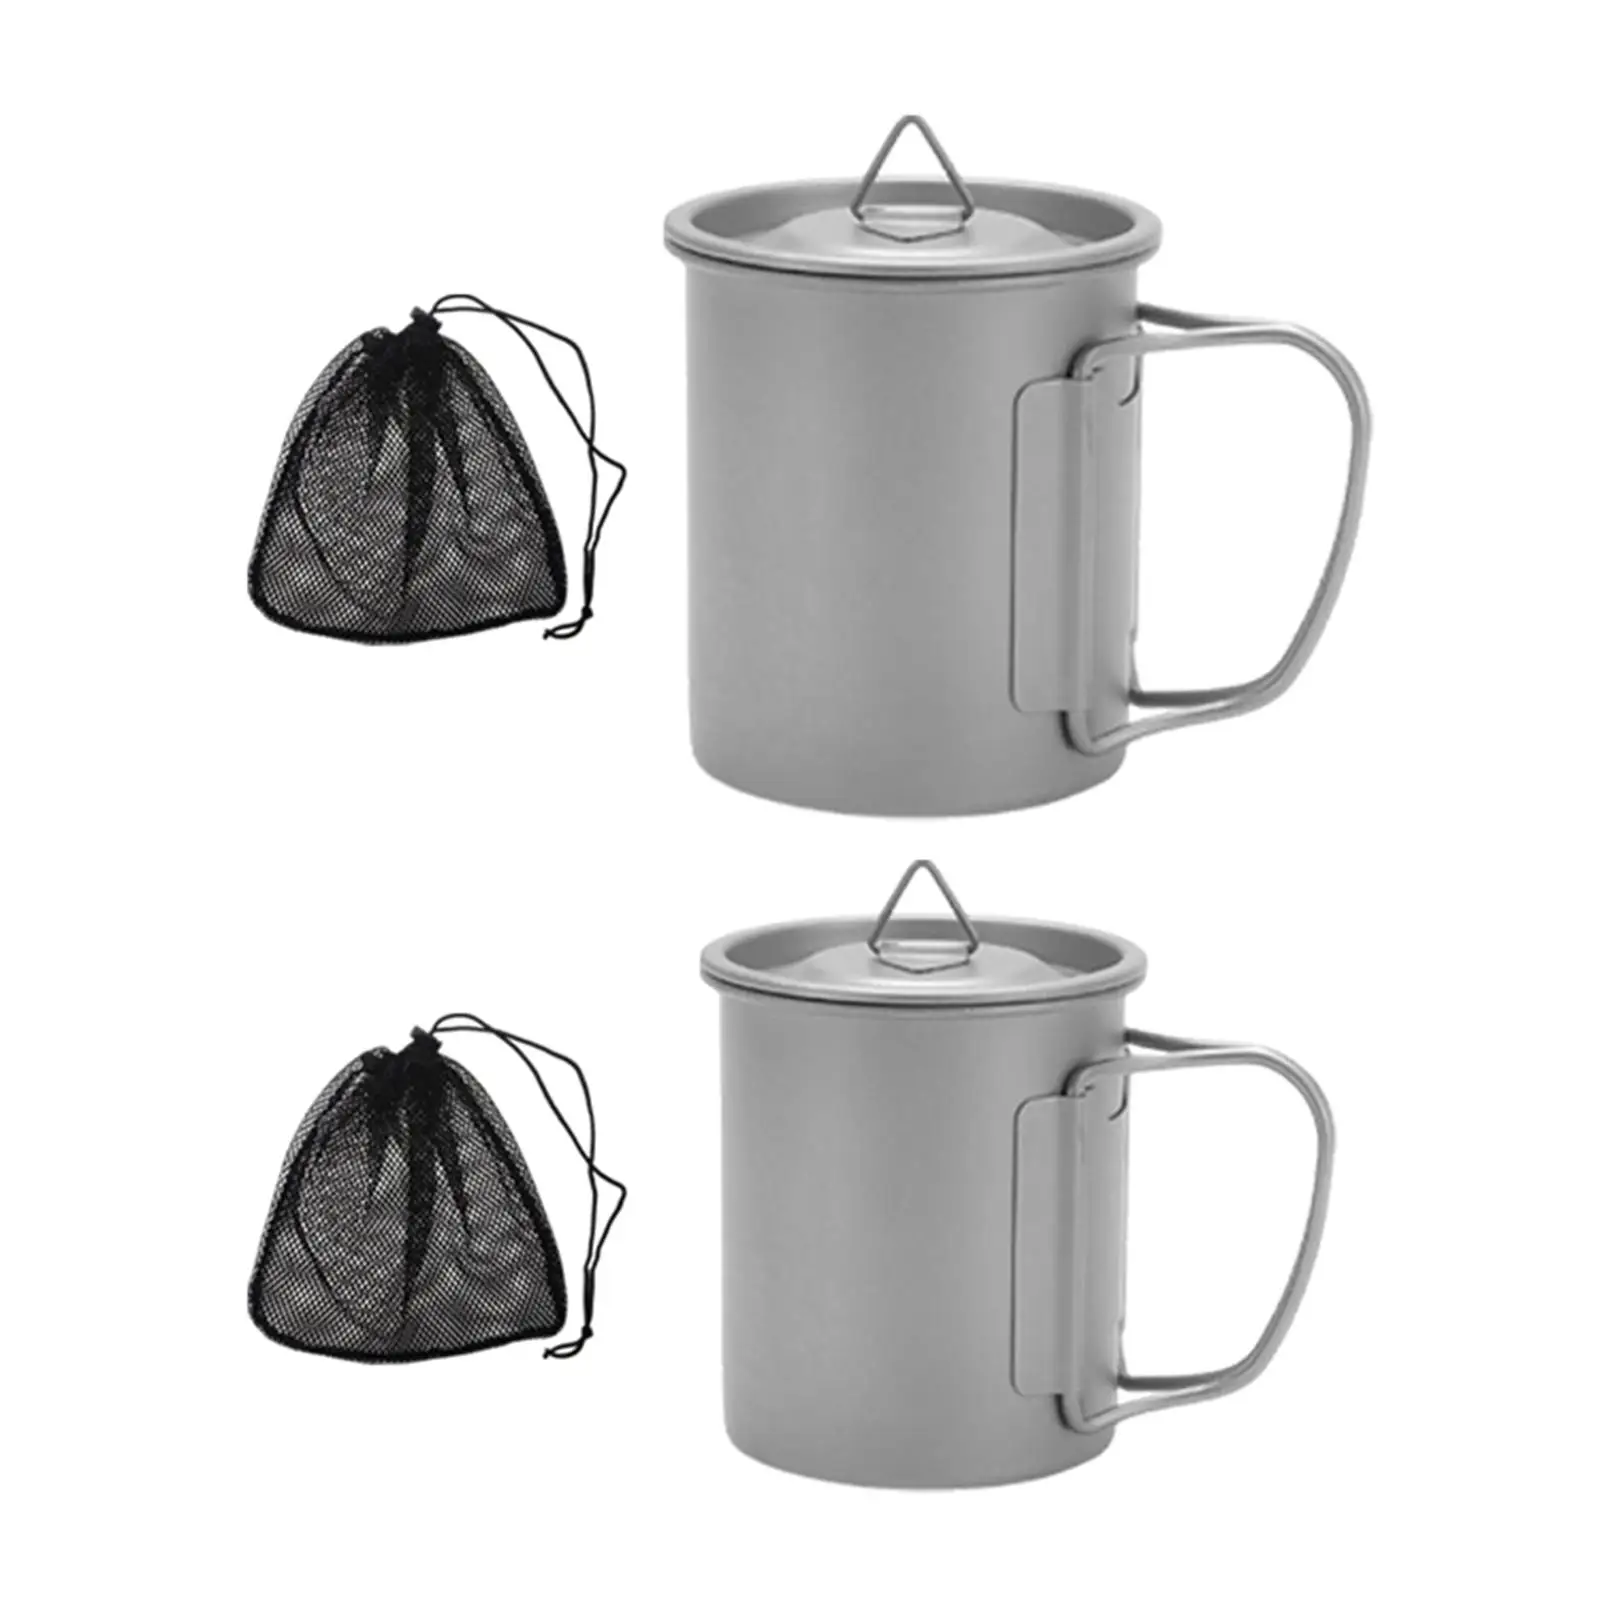 Titanium Mug Portable Camping Water Cup Mug Foldable Handle, Outdoor Ultralight Cup with Lid